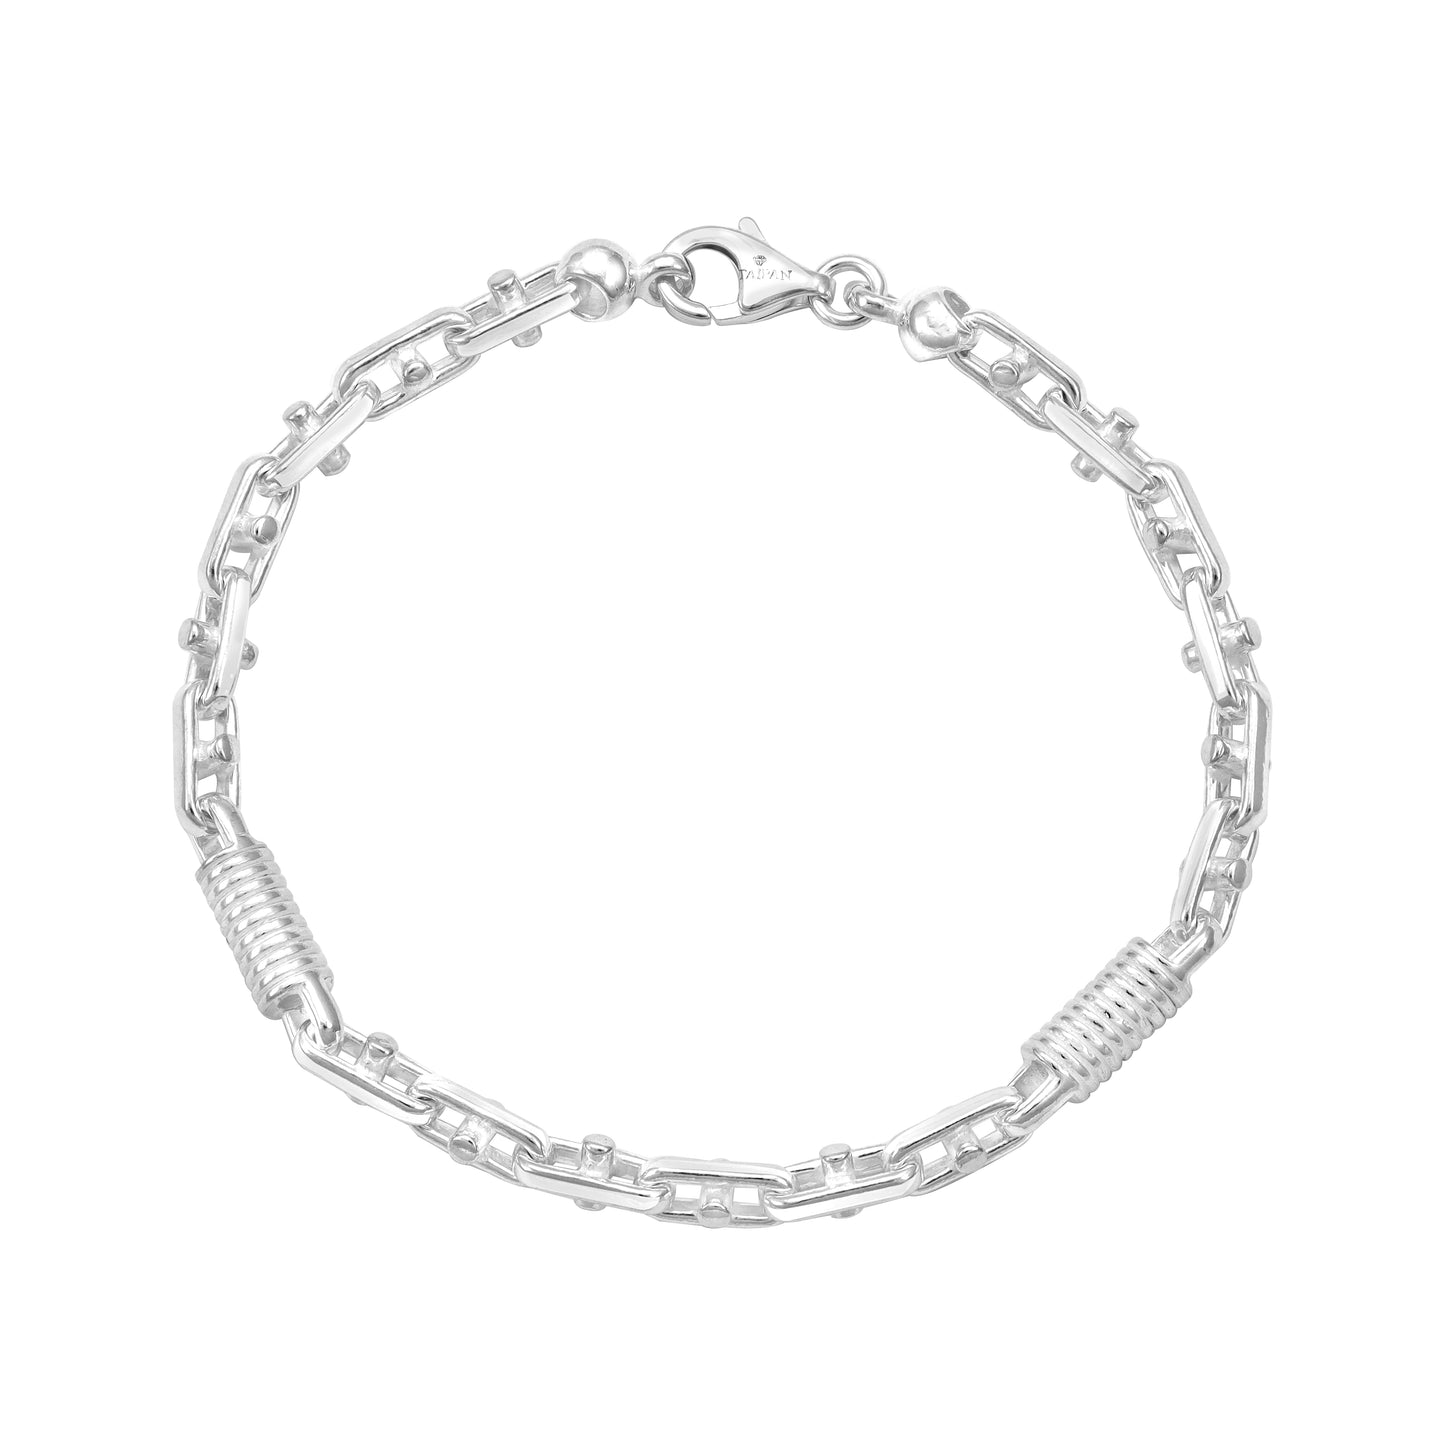 5mm Monte Carlo kette Armband - 925 Silber ver.2